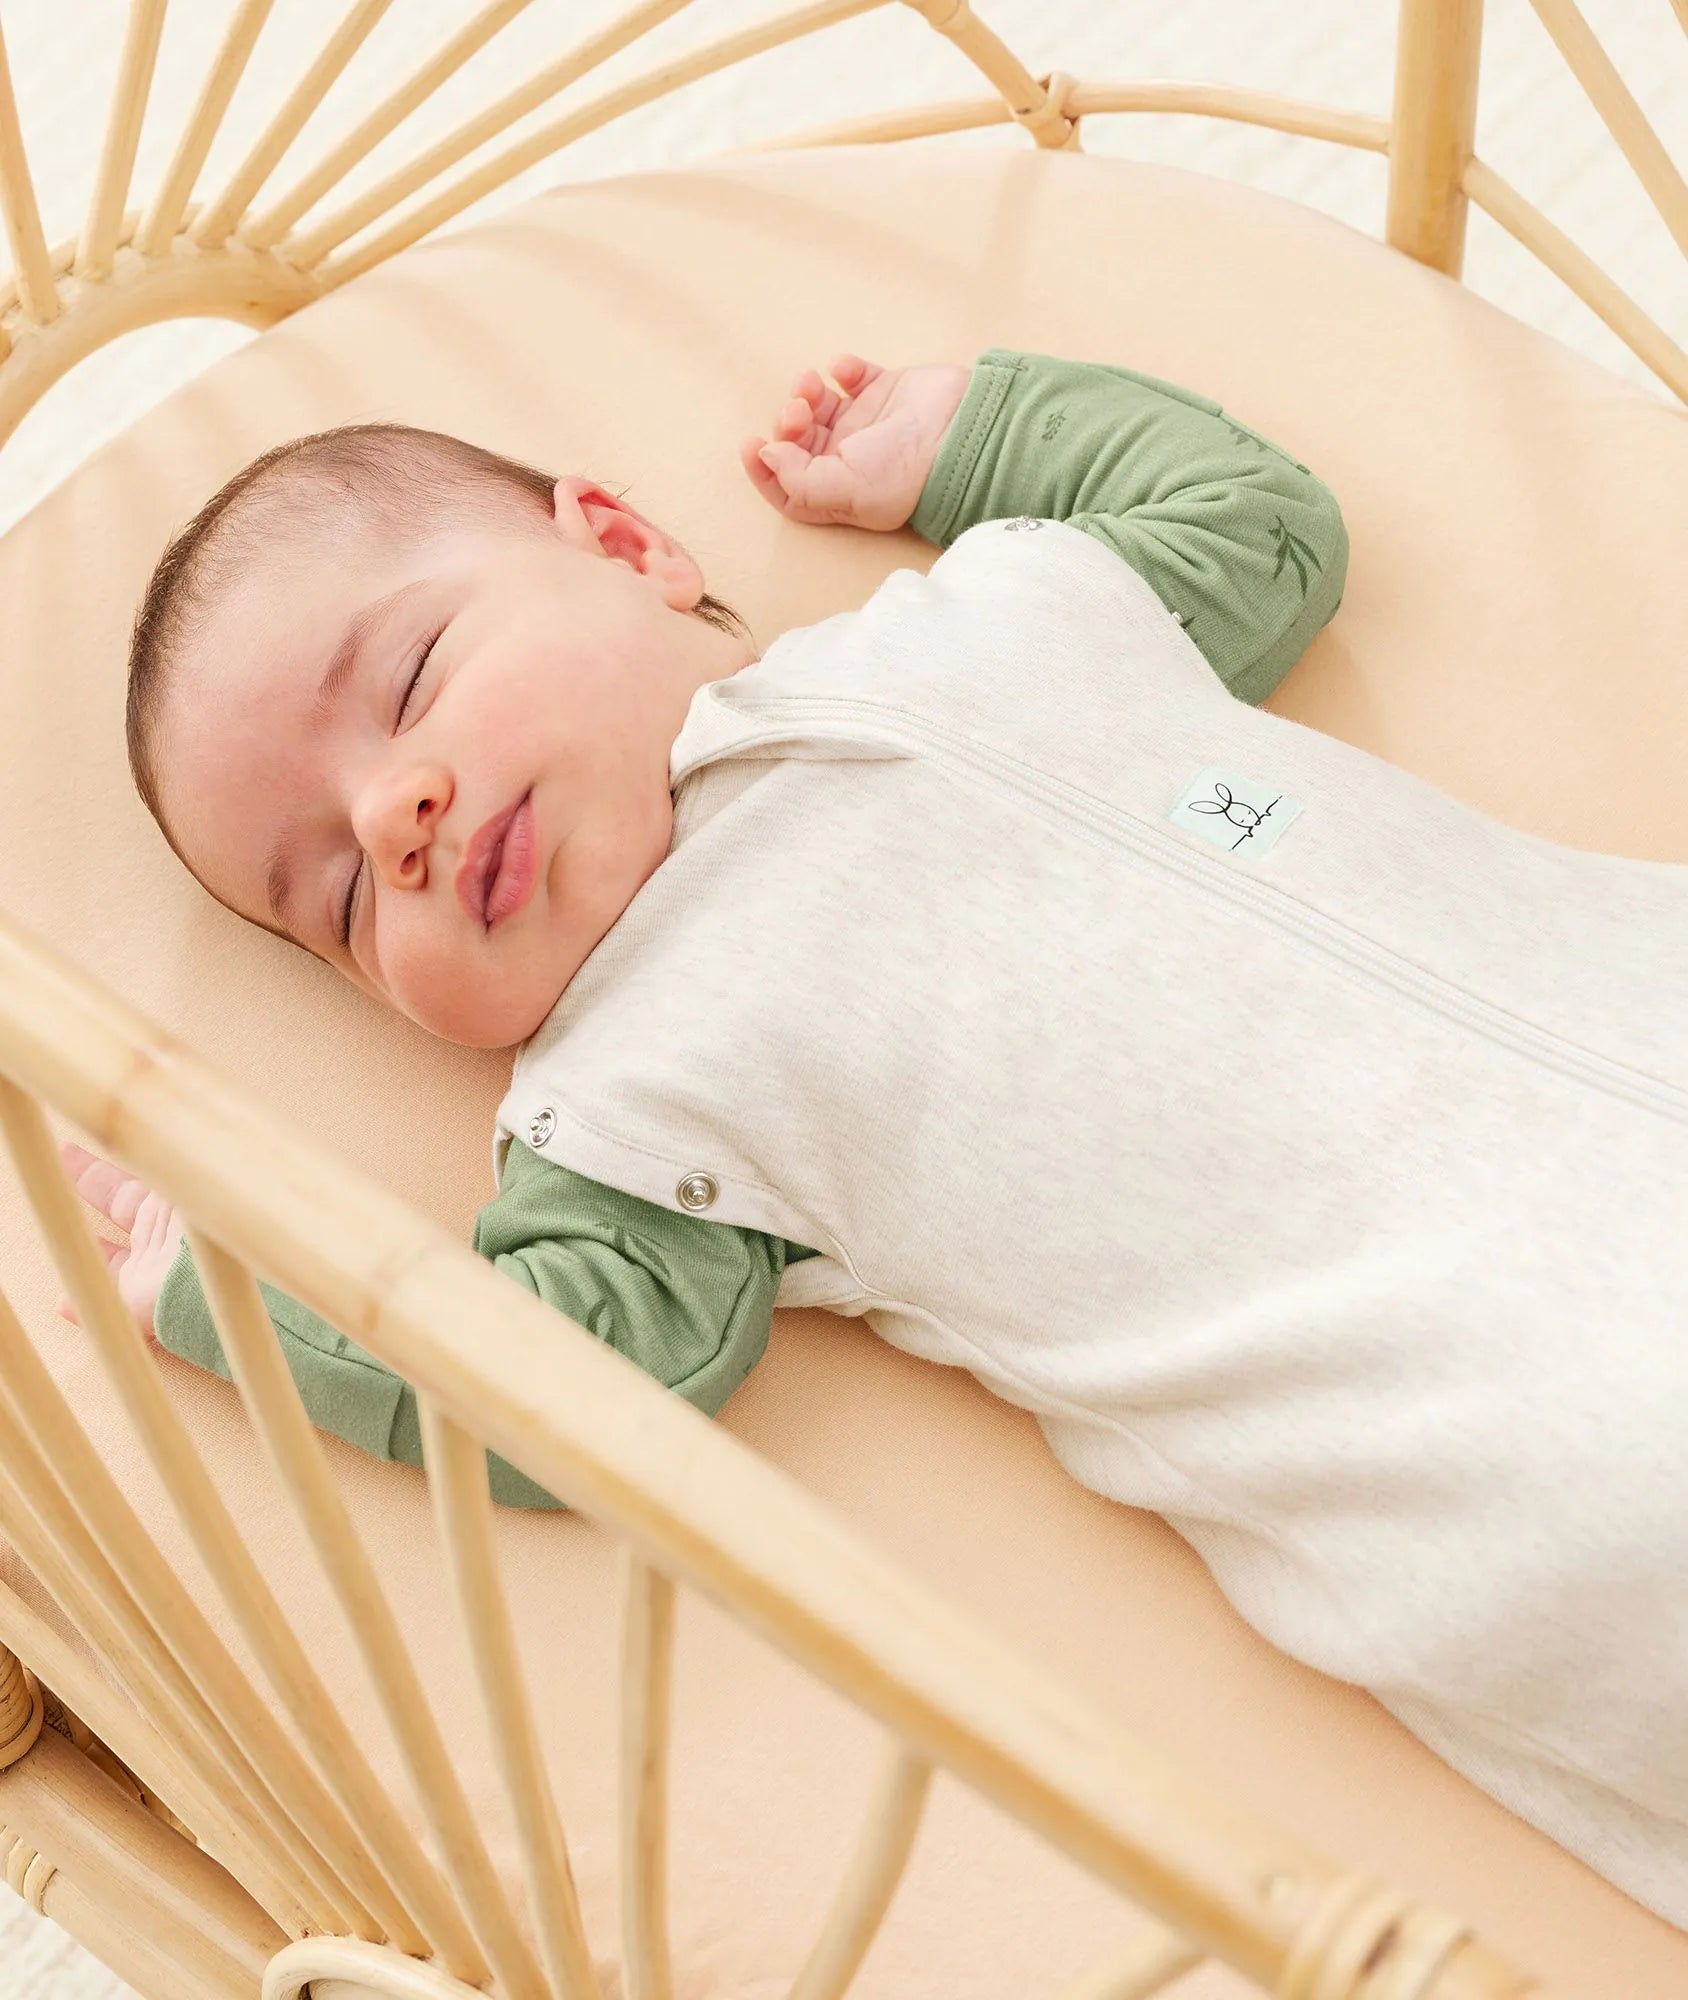 ErgoPouch Cocoon Swaddle Sack 1.0 TOG, Oatmeal Marle